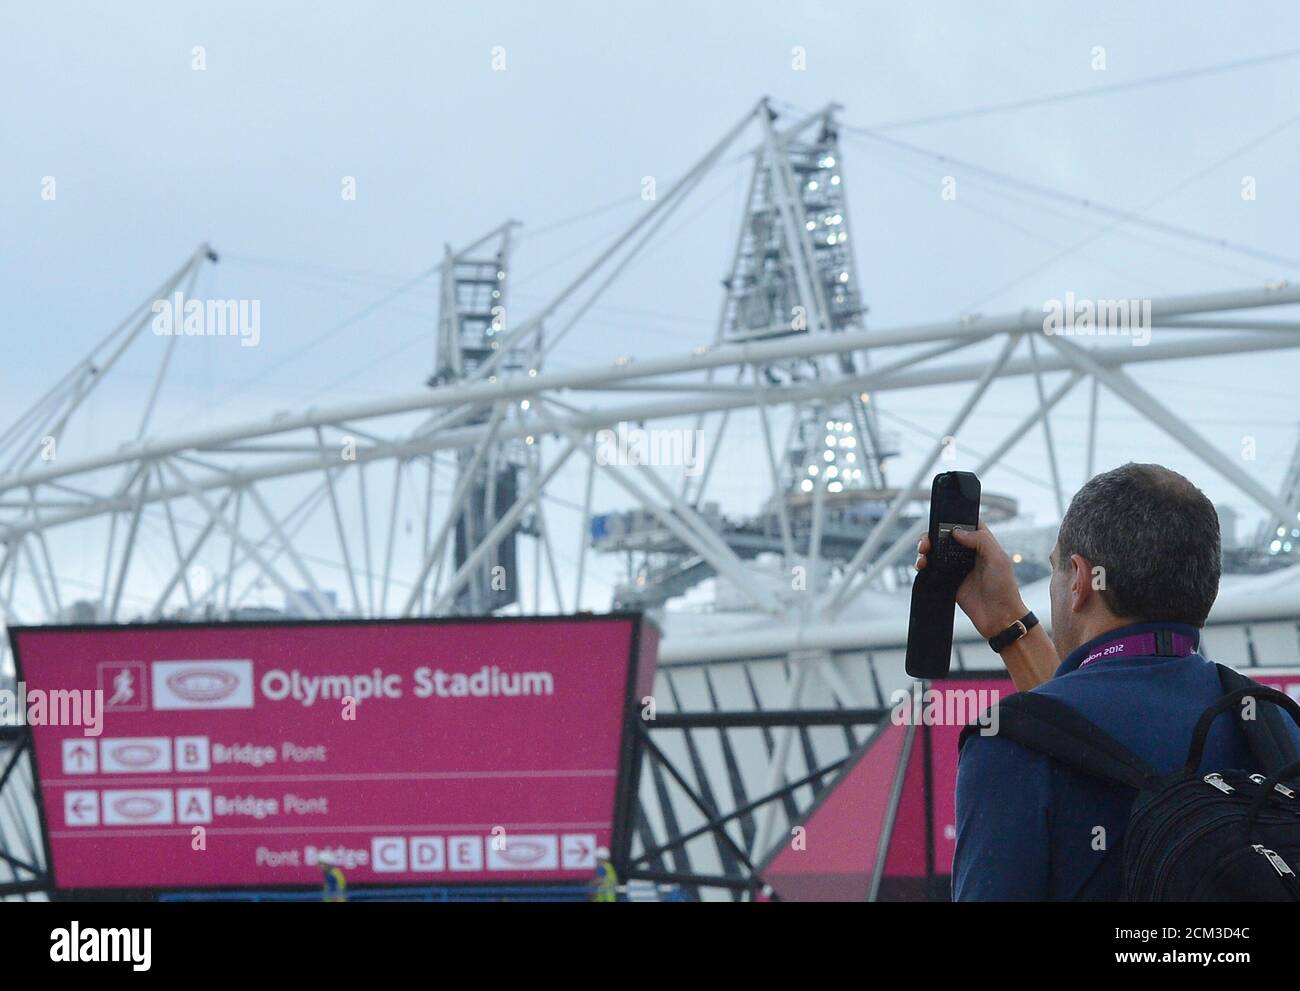 A worker records images using a phone outside the Olympic Stadium at the Olympic Park in Stratford, the location of the London 2012 Olympic Games, in east London July 20, 2012. REUTERS/Toby Melville  (BRITAIN - Tags: SPORT OLYMPICS) Stock Photo